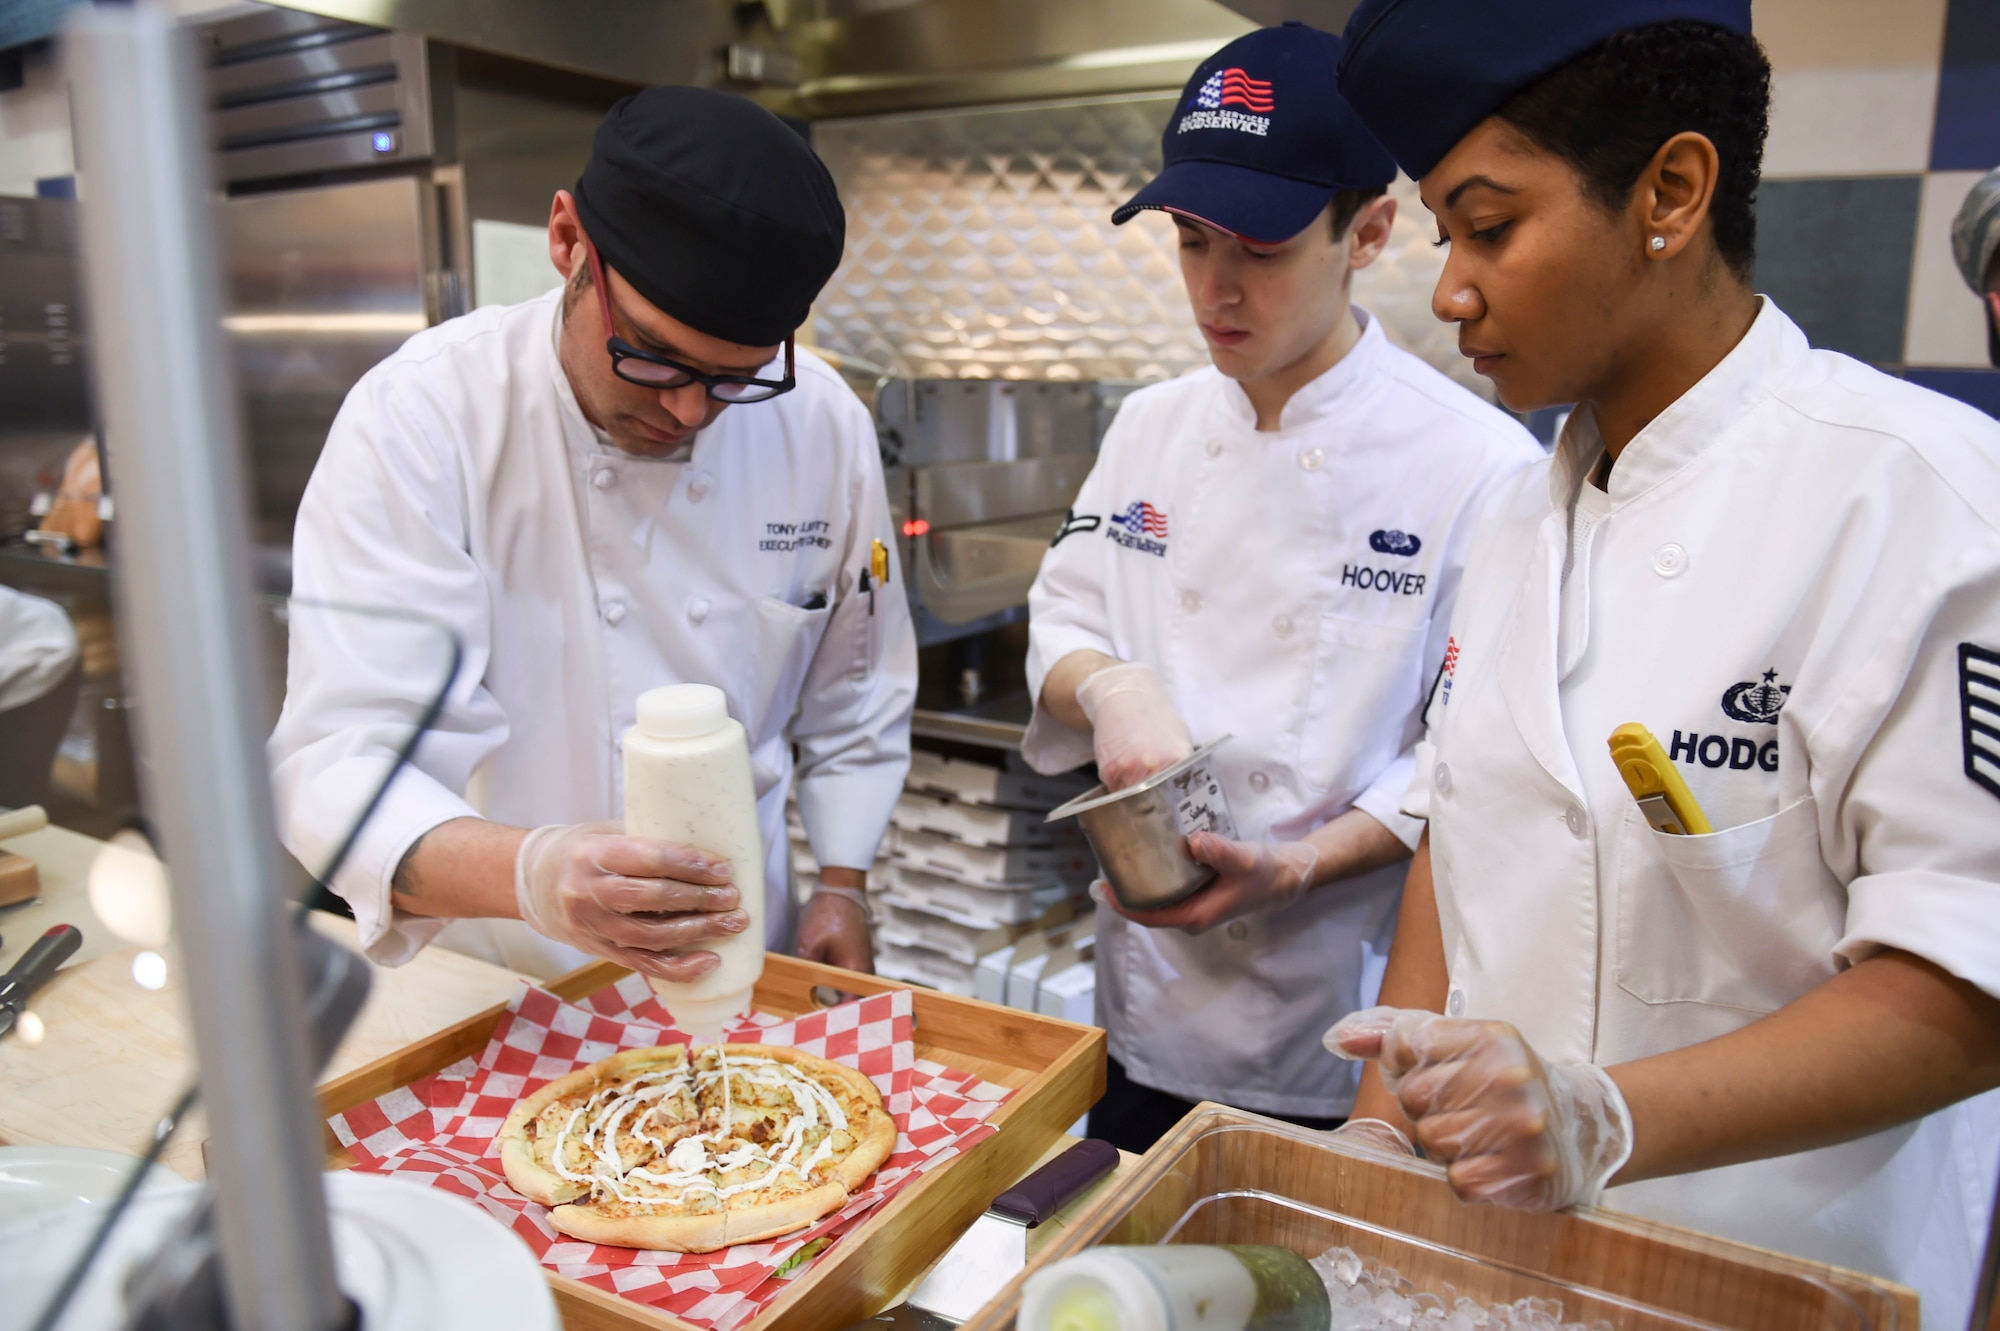 U.S. Air Force 19th Force Support Squadron dining facility Airmen and an Aramark chef prepare a personal-style pizza for sampling during the grand re-opening ceremony Jan. 23, 2017, at Little Rock Air Force Base, Ark. The pizza zone now offers made-to-order personal pan pizzas. The dining facility won the 2017 Hennessy Award Region 1 (East)for best food operation in the Air Force.(U.S. Air Force photo by Staff Sgt. Kaylee Clark)